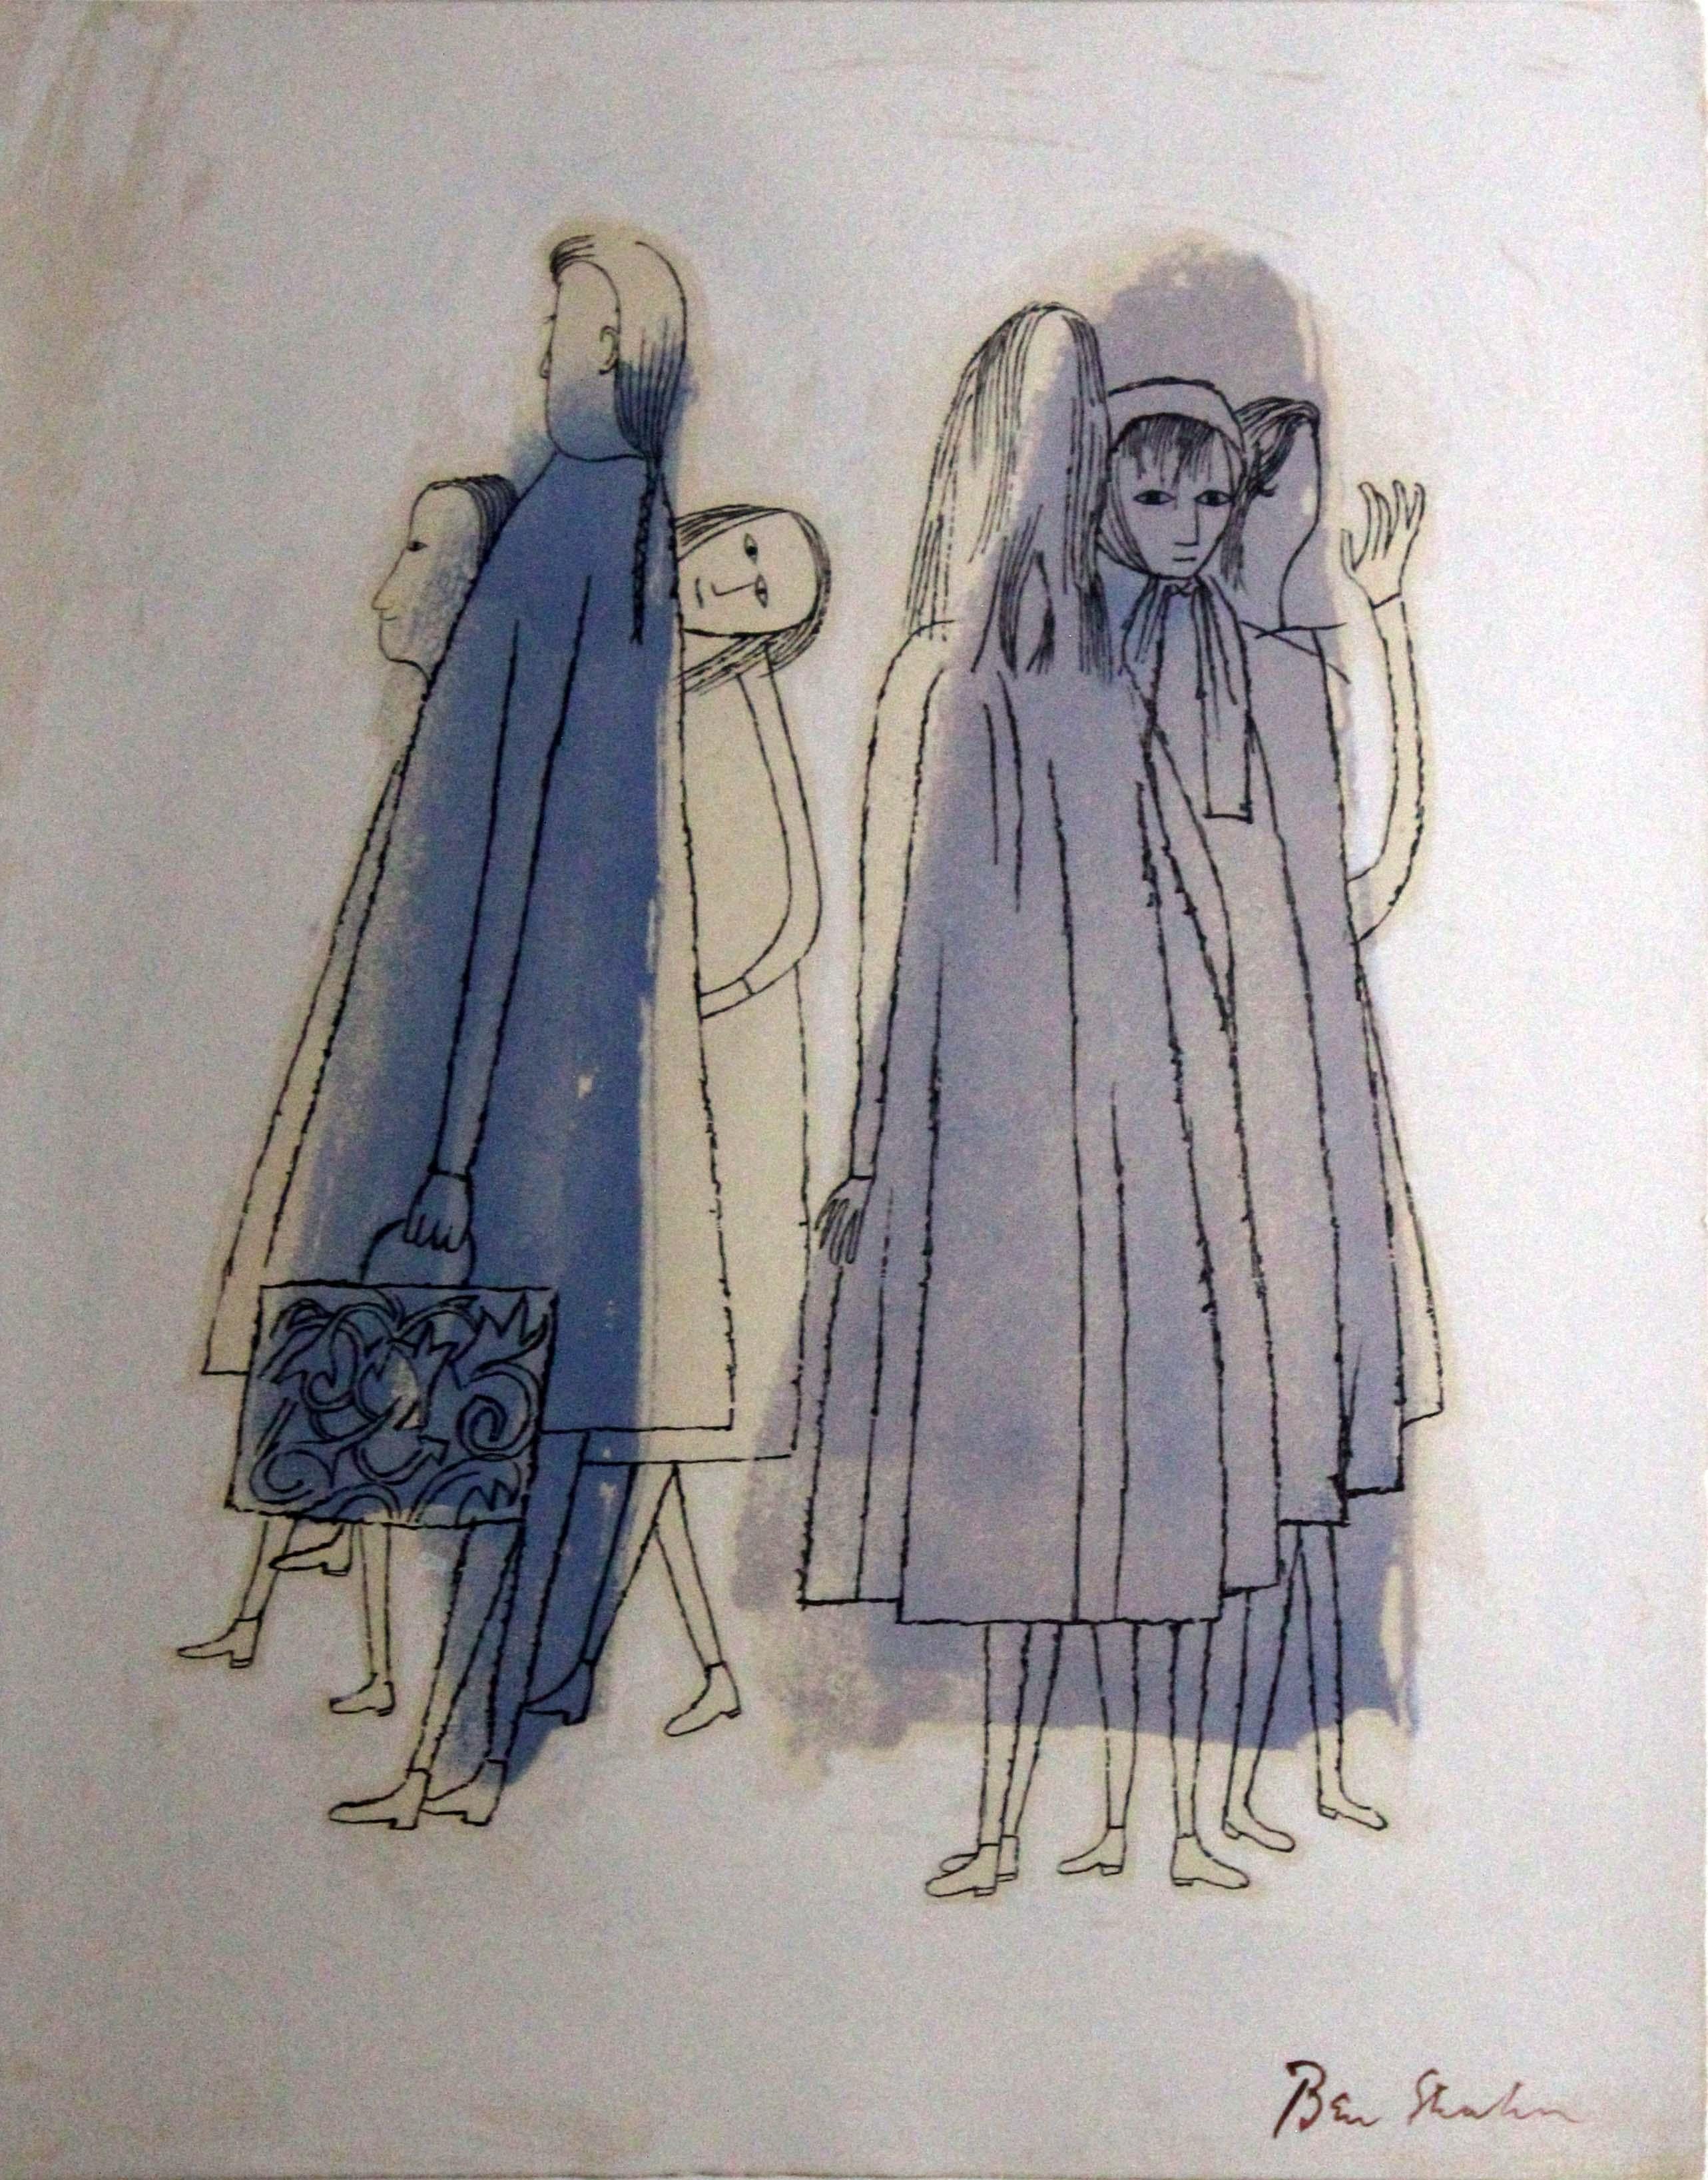 An intriguing and sentimental lithograph titled To Days of Childhood That are Still Unexplained by Ben Shahn. From the Rainier Maria Rilke portfolio, For the Sake of a Single Verse, New York, 1968, First edition lithograph printed in colors at